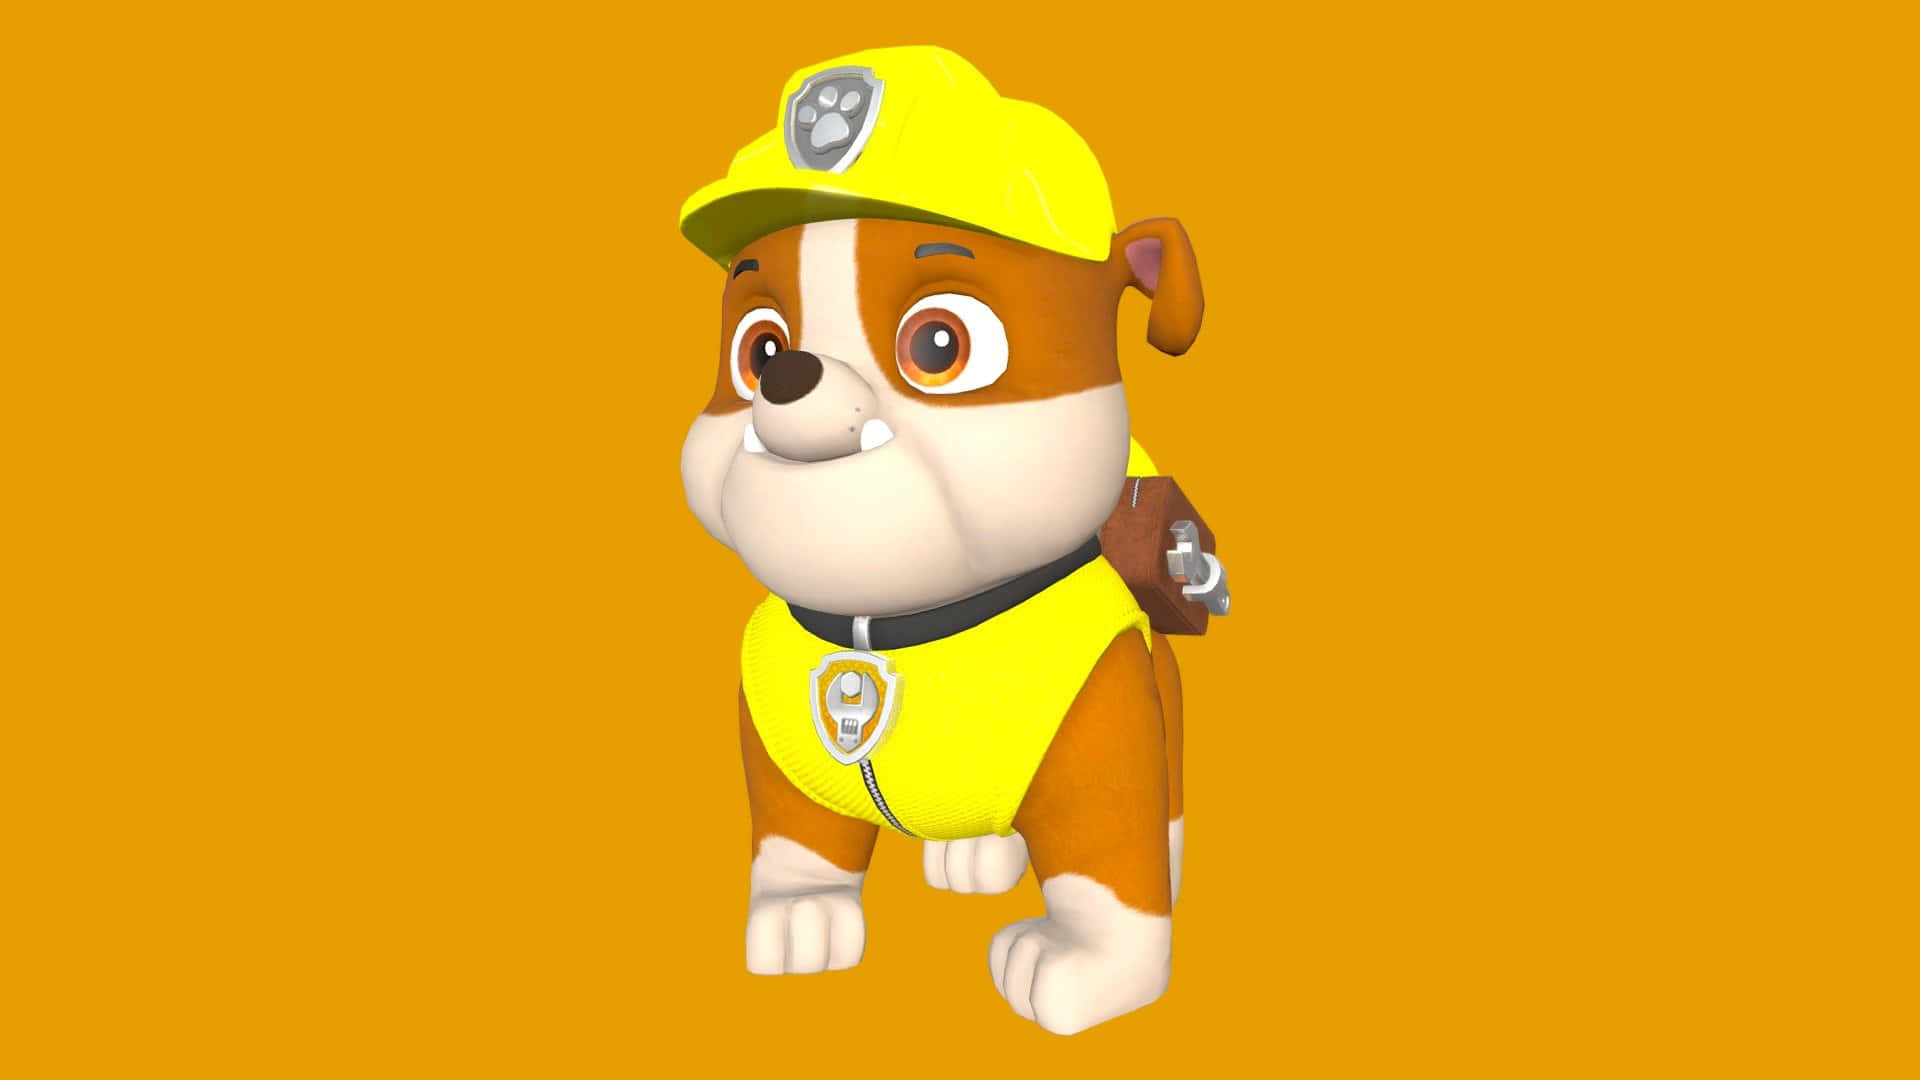 Join the Paw Patrol!